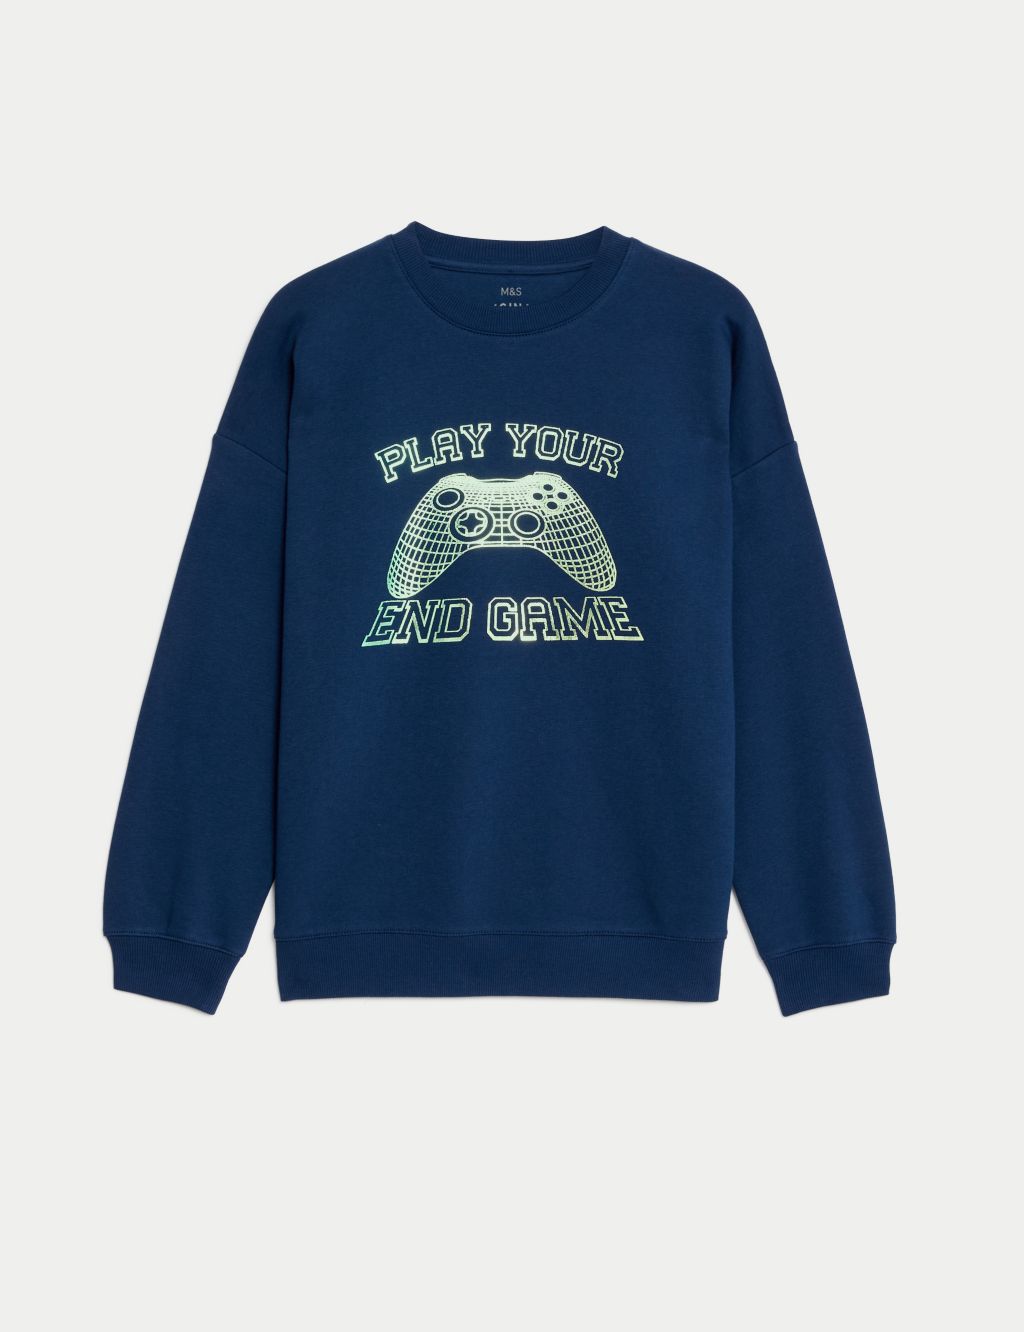 Cotton Rich Play Your End Game Sweatshirt (6-16 Yrs) image 1